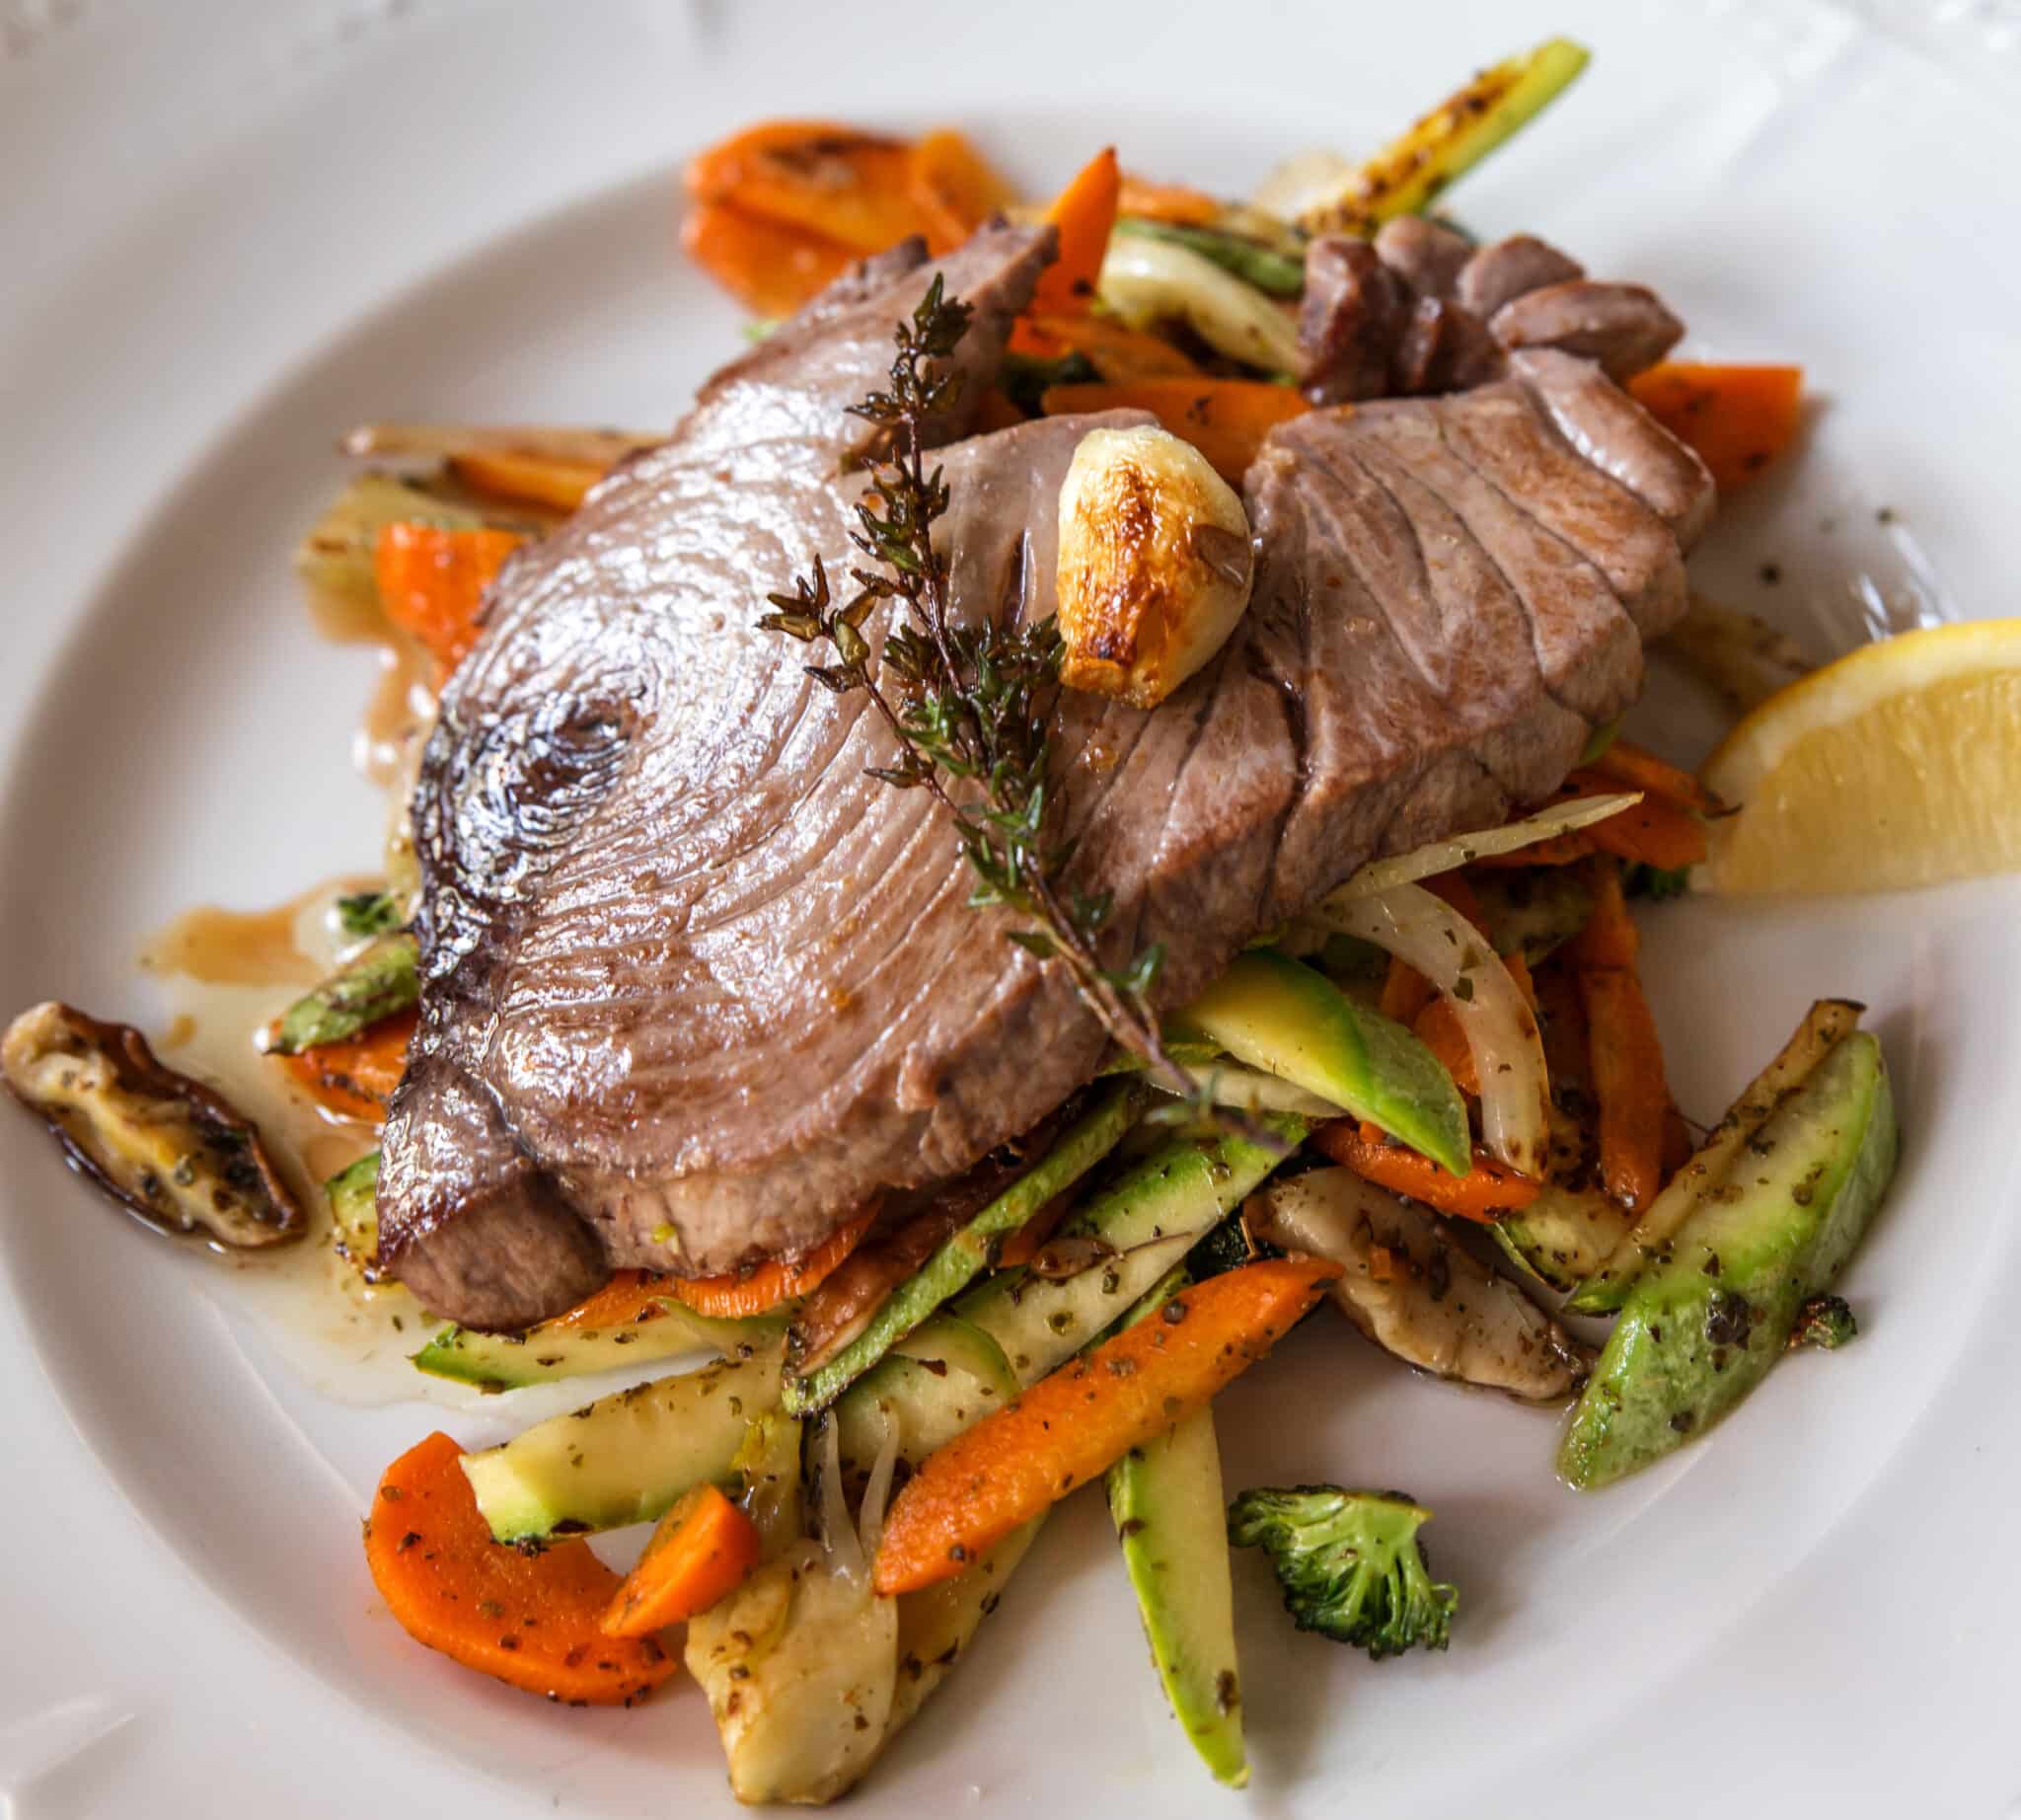 Grilled tuna steak with vegetables - Congelados Apolo